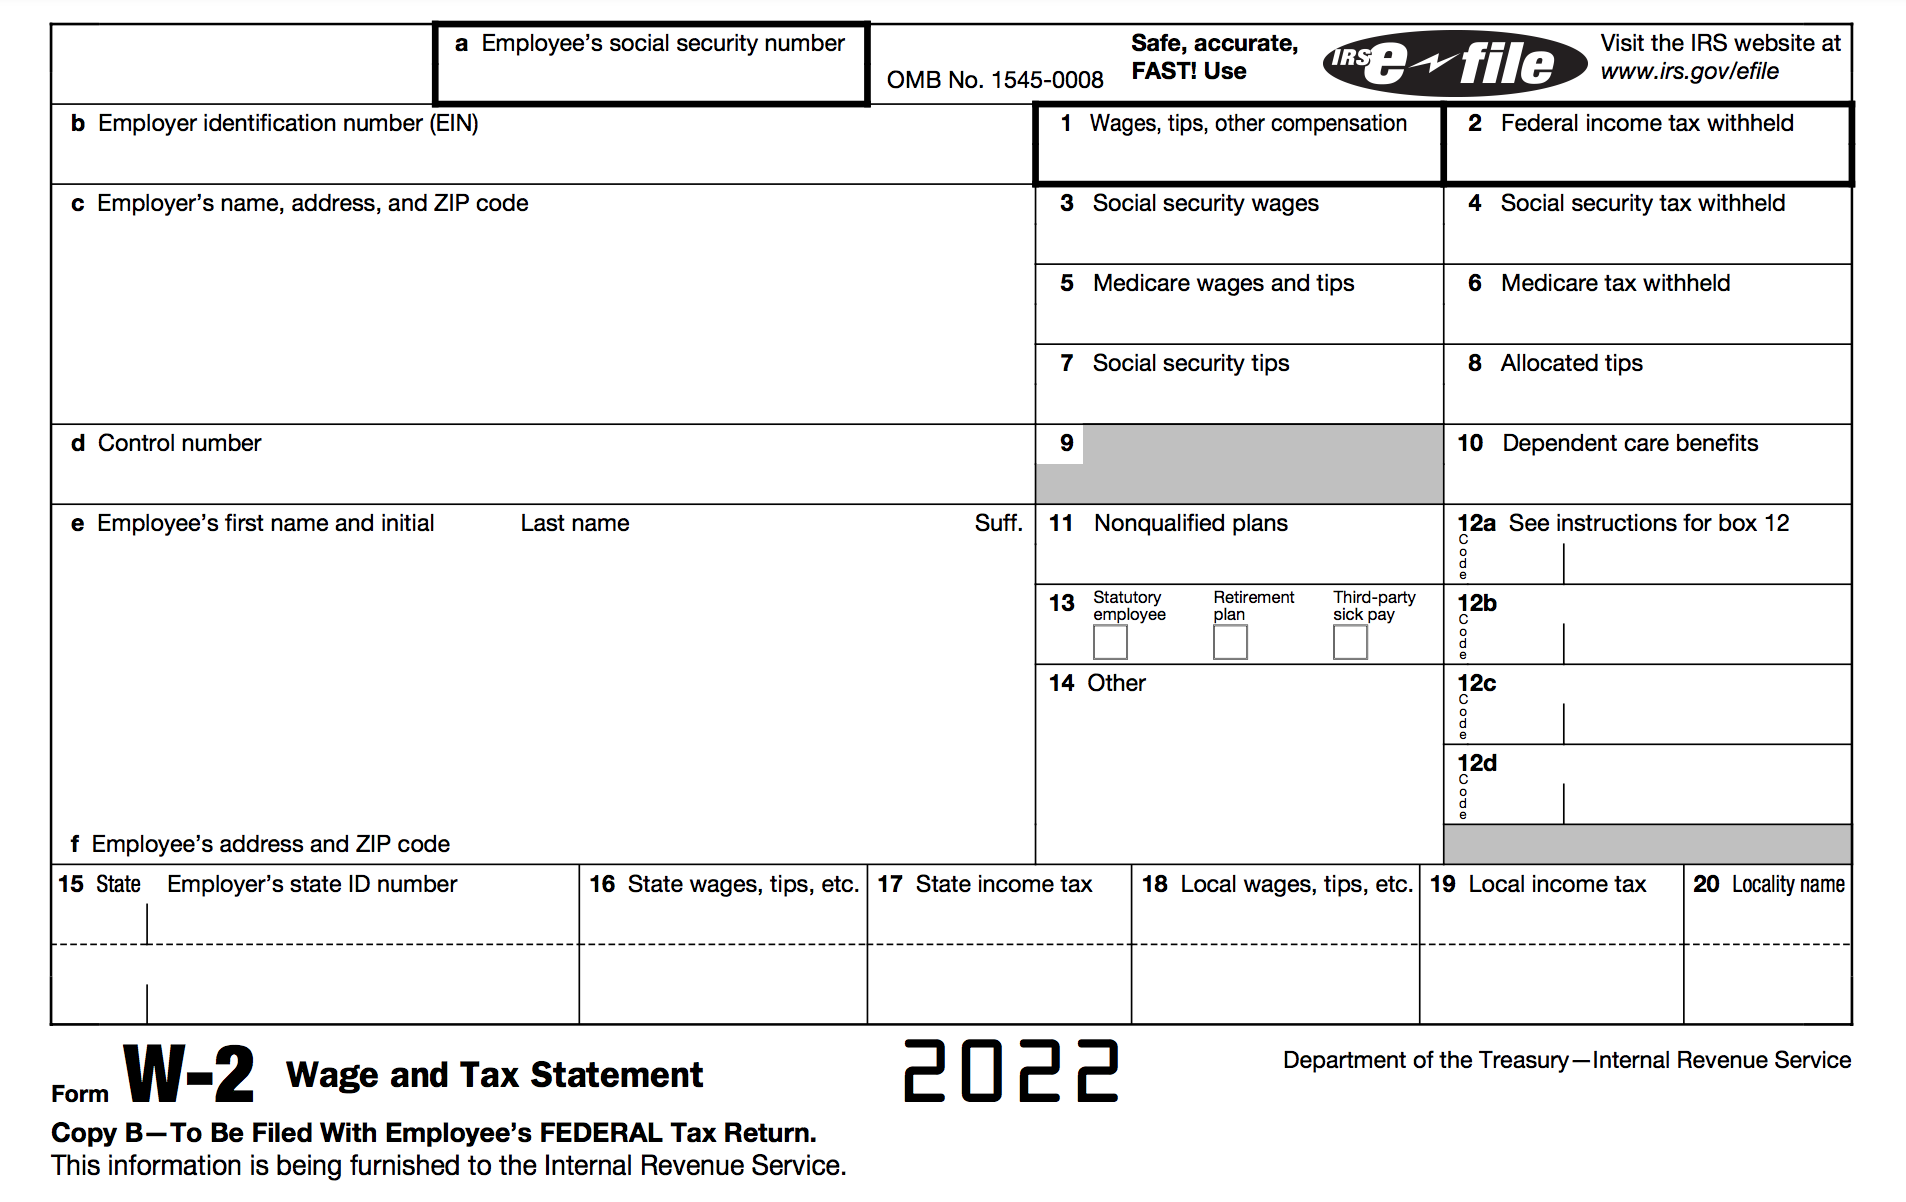 How To Fill Out A W-2 Tax Form | Smartasset regarding Is Form 1099 A W2